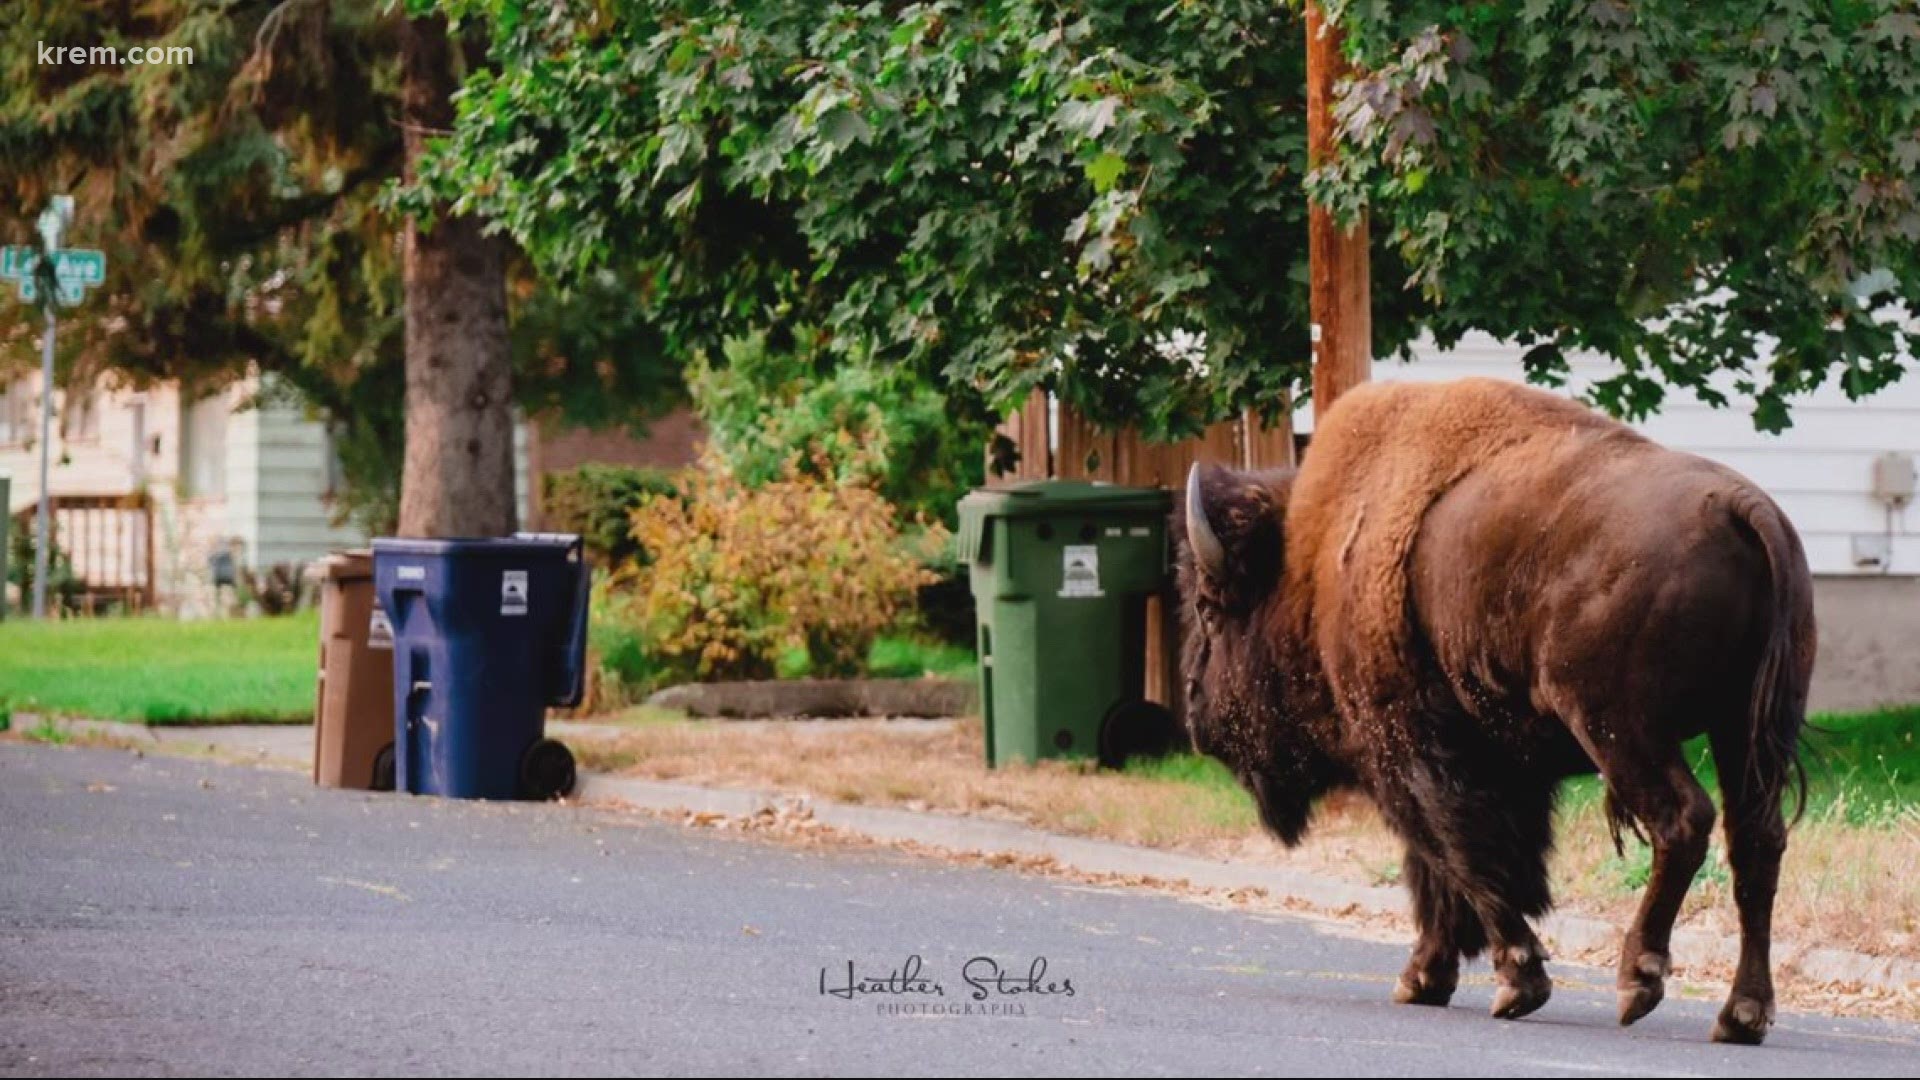 It appears the bison are the same two that escaped their South Hill home and wandered through Underhill Park in late July.